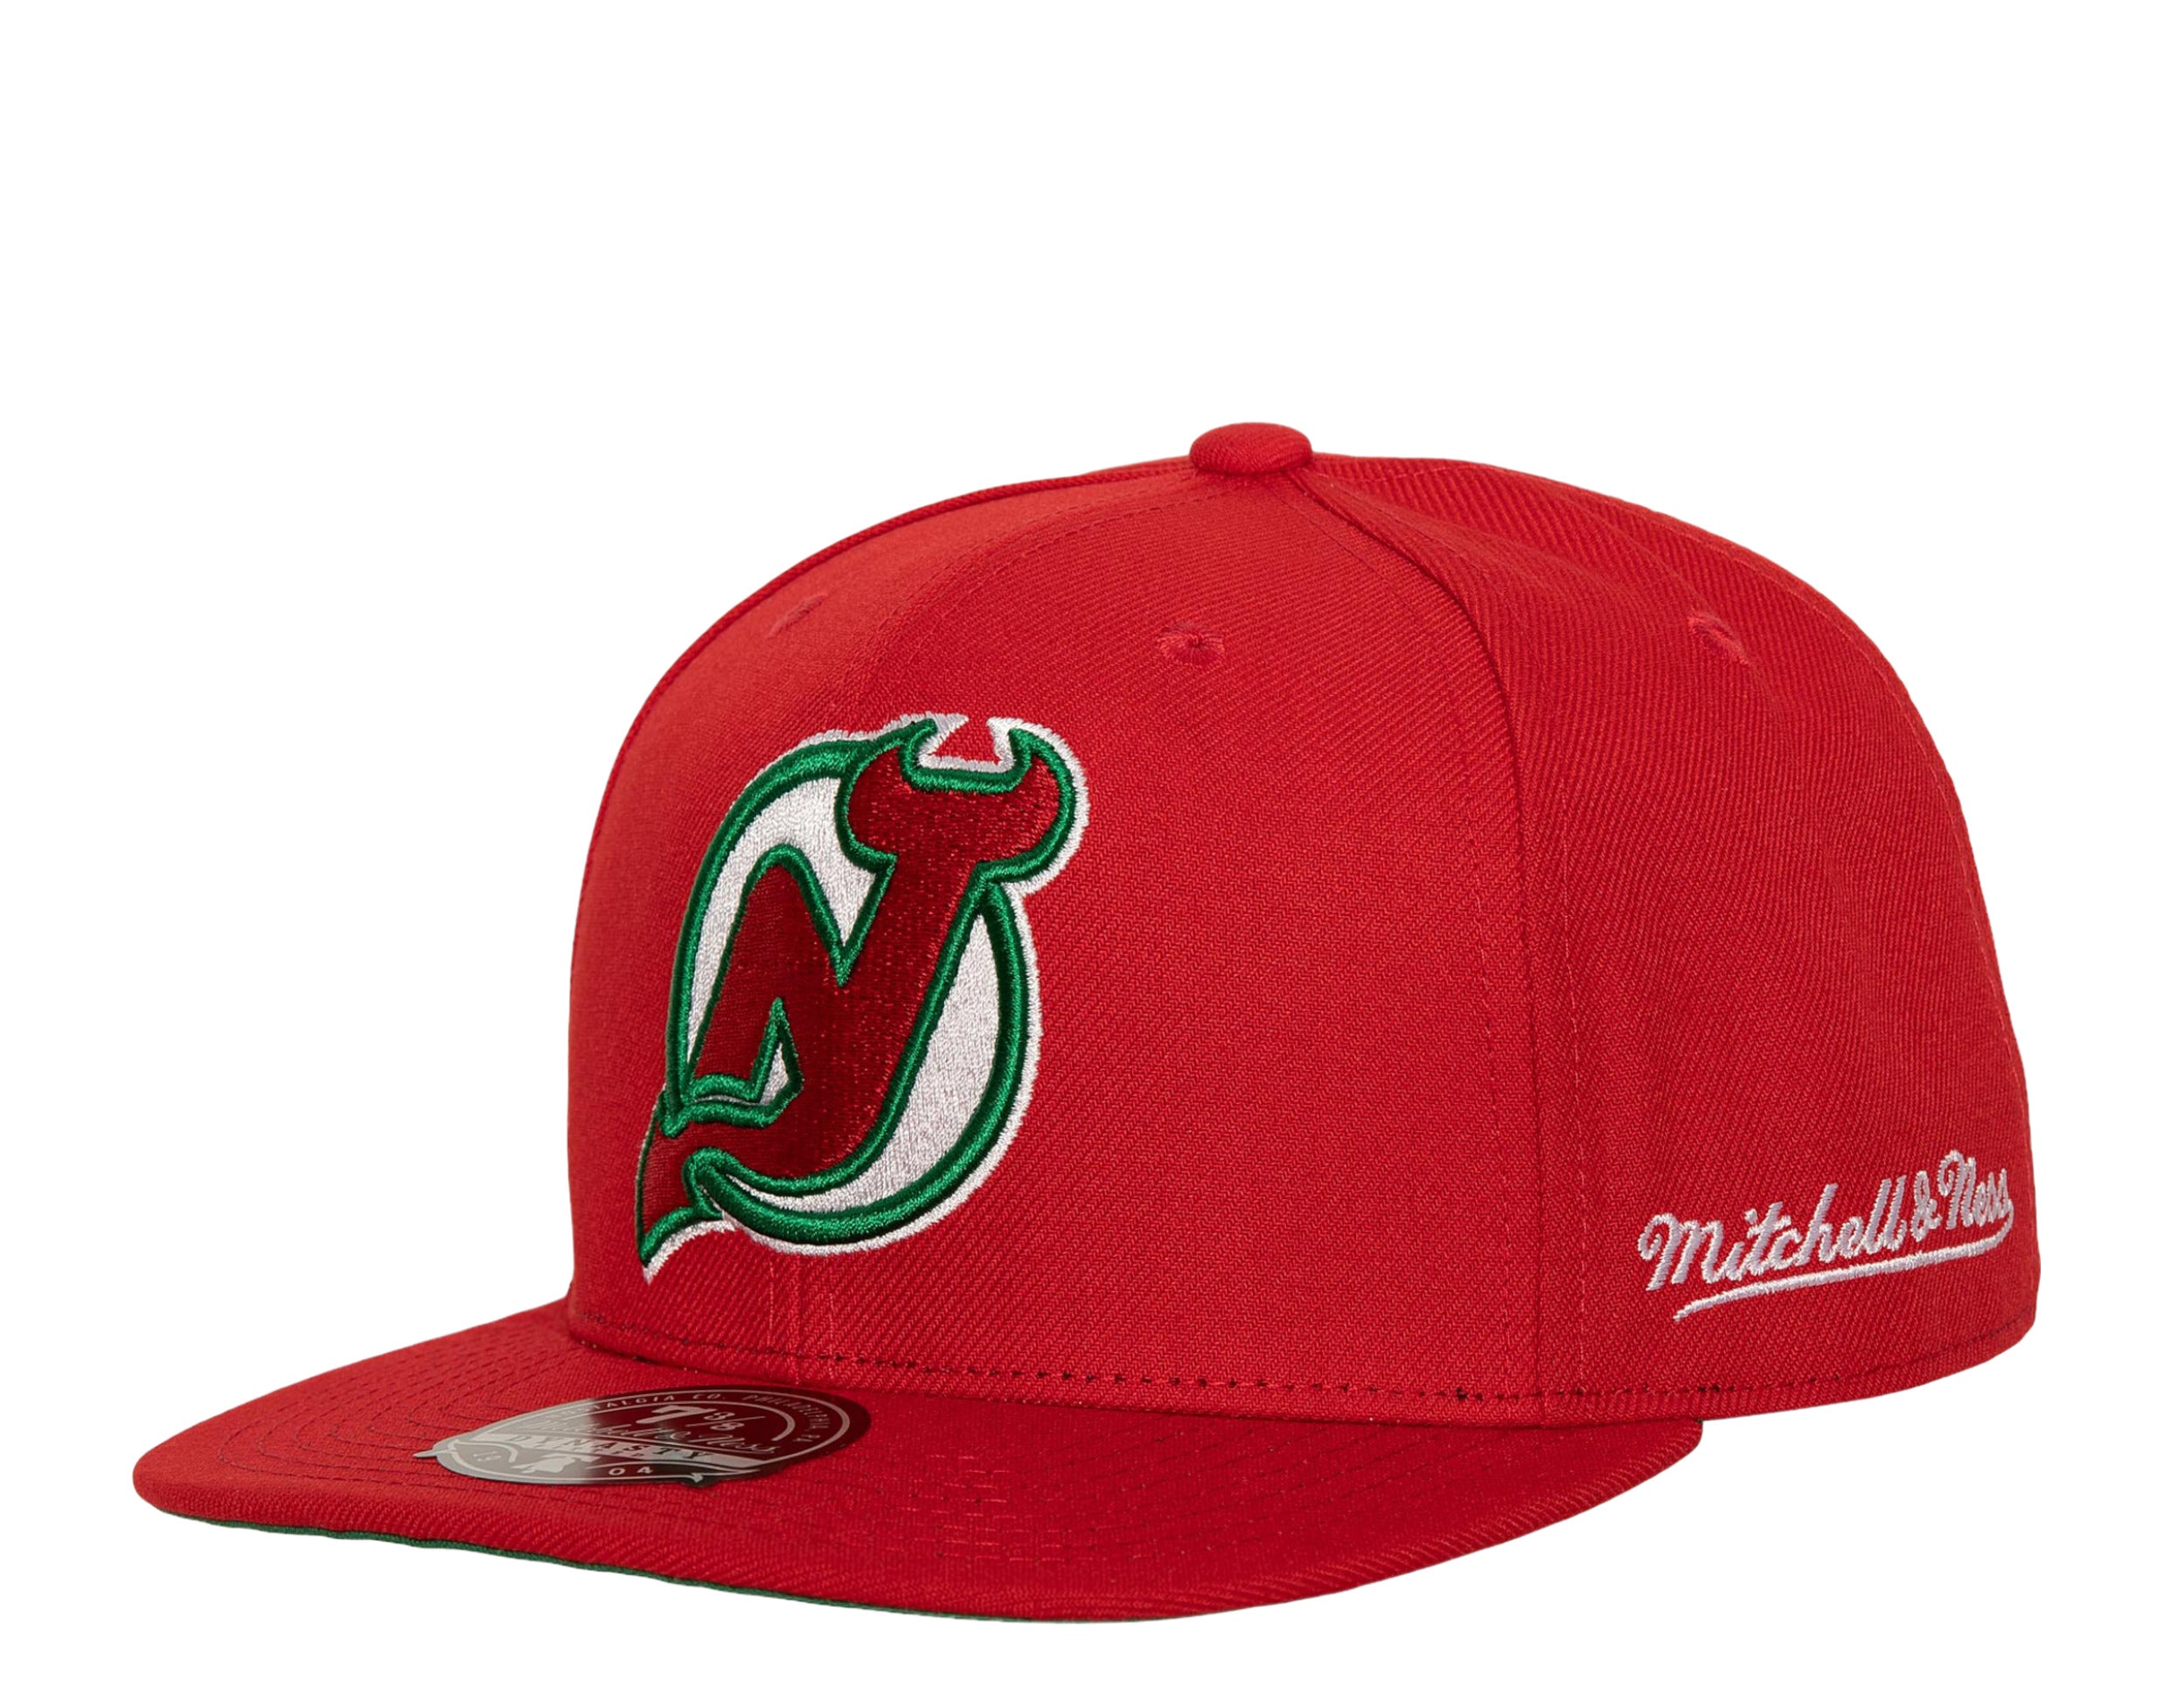 How do the Devils feel about wearing the green and red retro